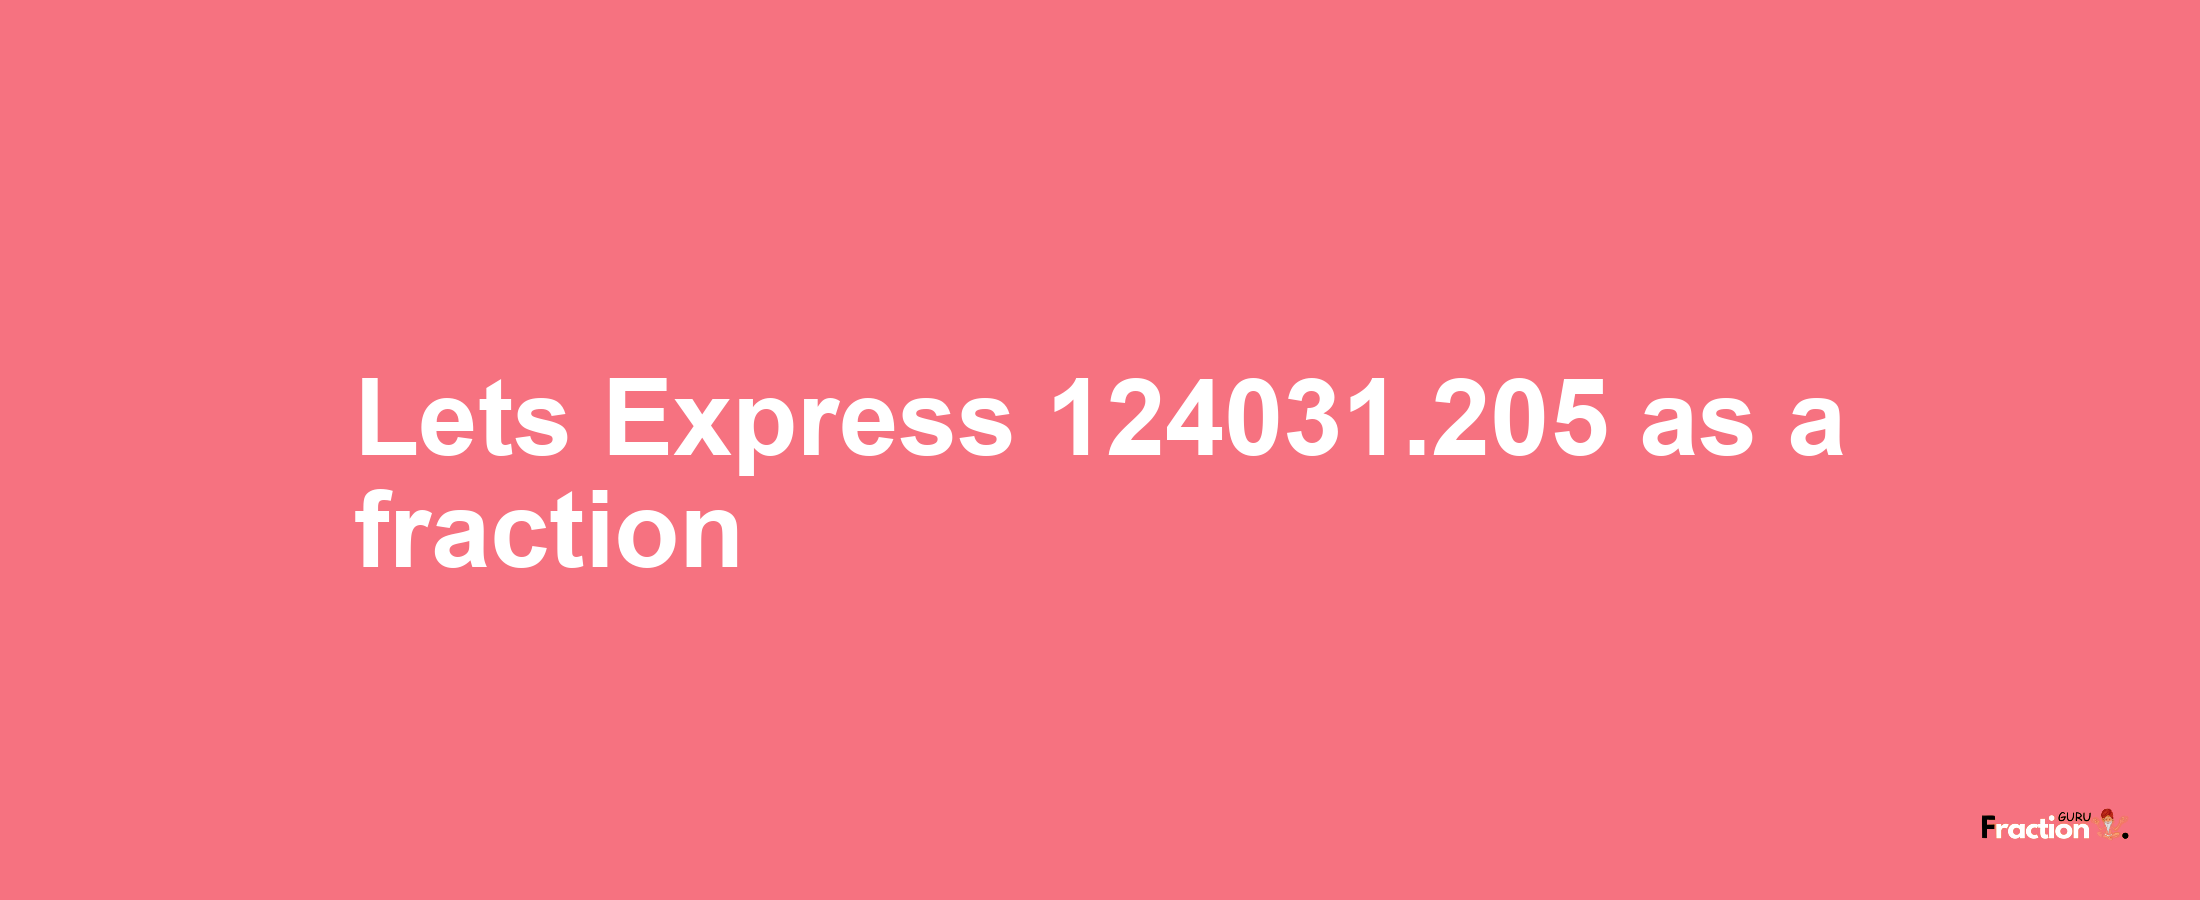 Lets Express 124031.205 as afraction